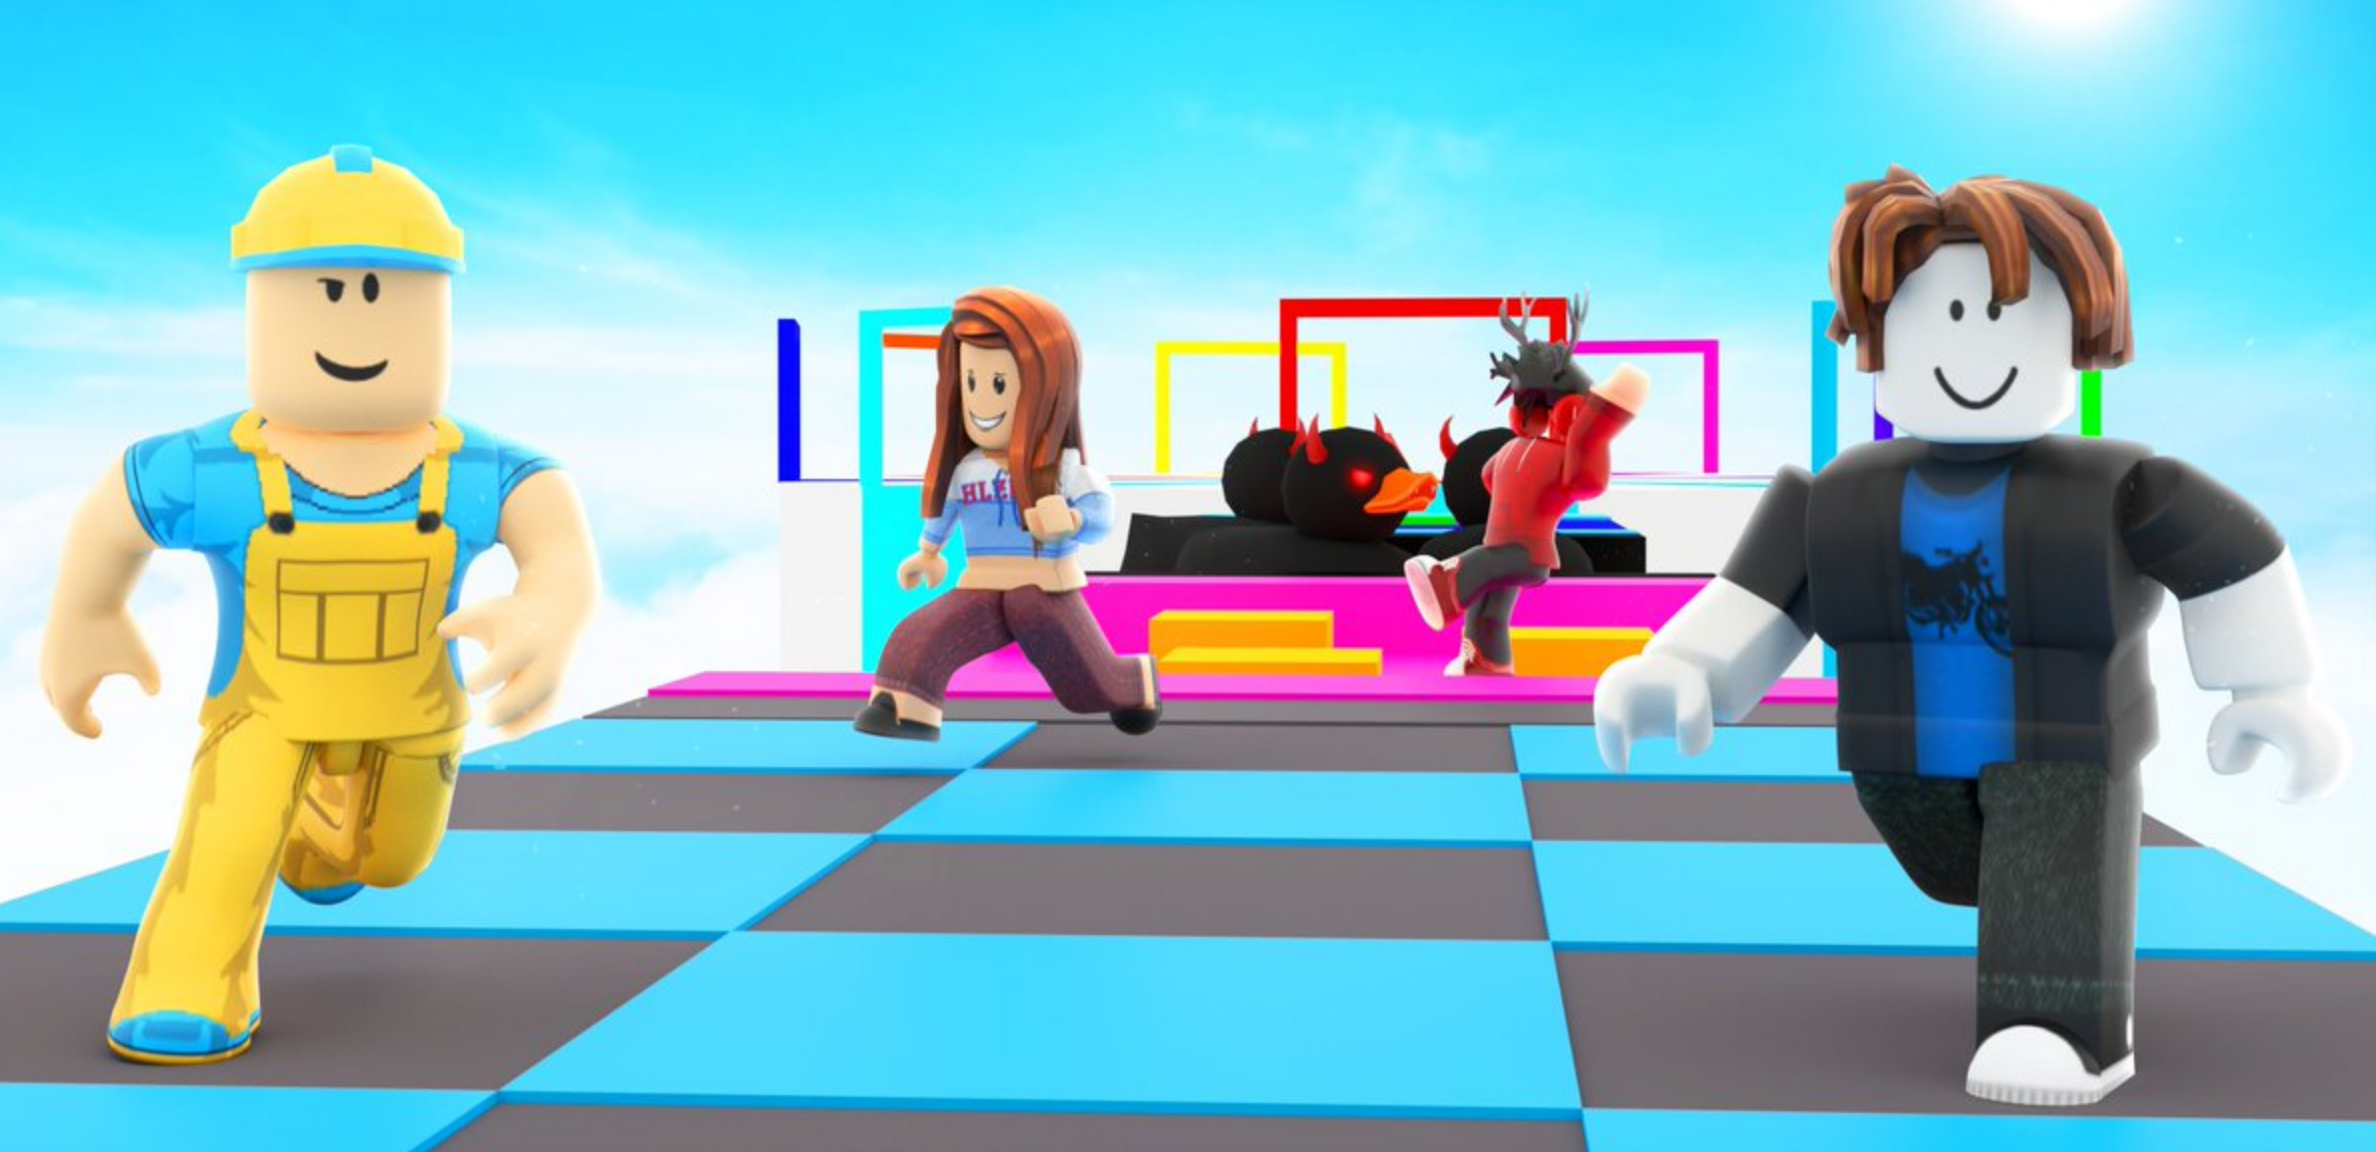 At School During Summer Break!? Escape the School Obby - Obstacle Course  Roblox Game Play 